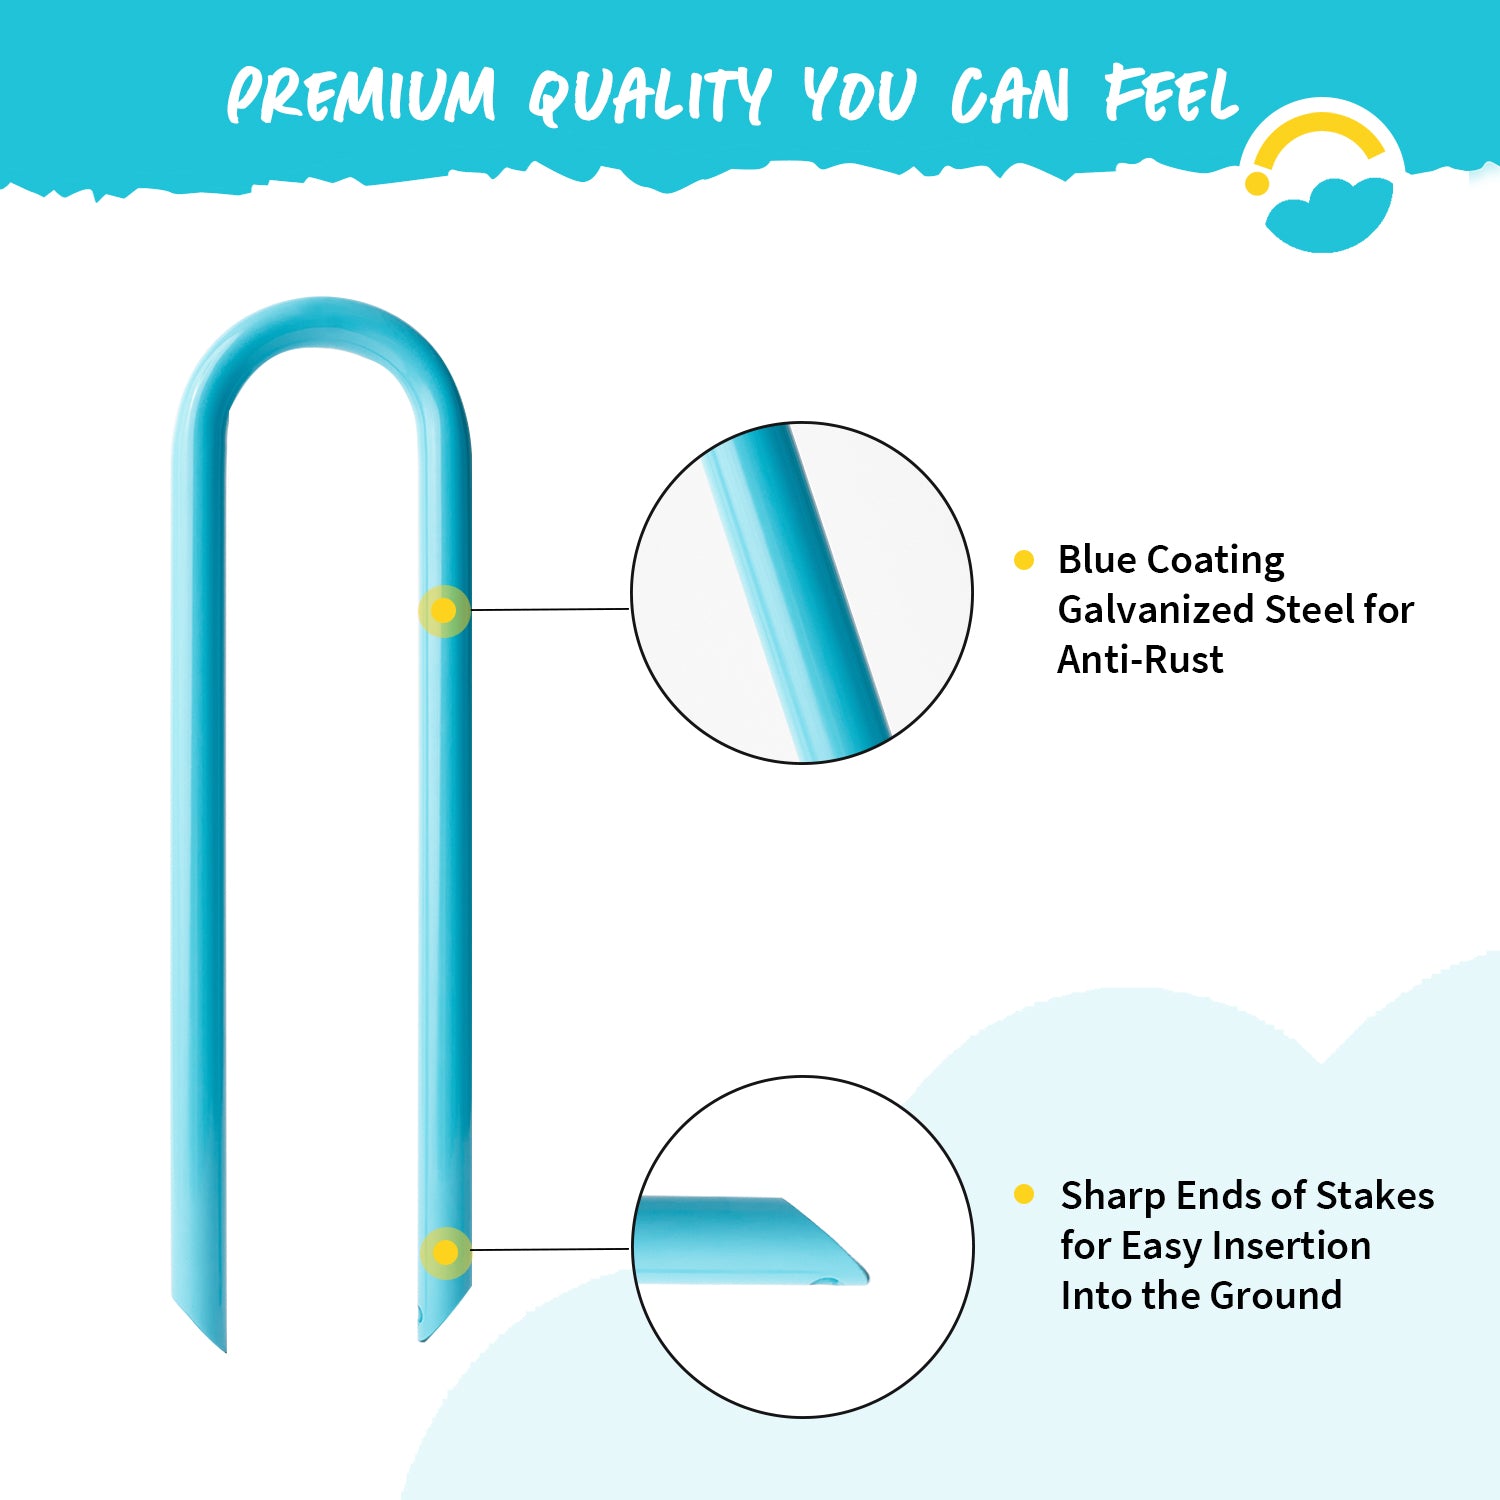 Premium Quality You Can Feel: Blue Coating Galvanized Steel for Anti-Rust. Sharp Ends of Stakes for Easy Insertion Into the Ground.